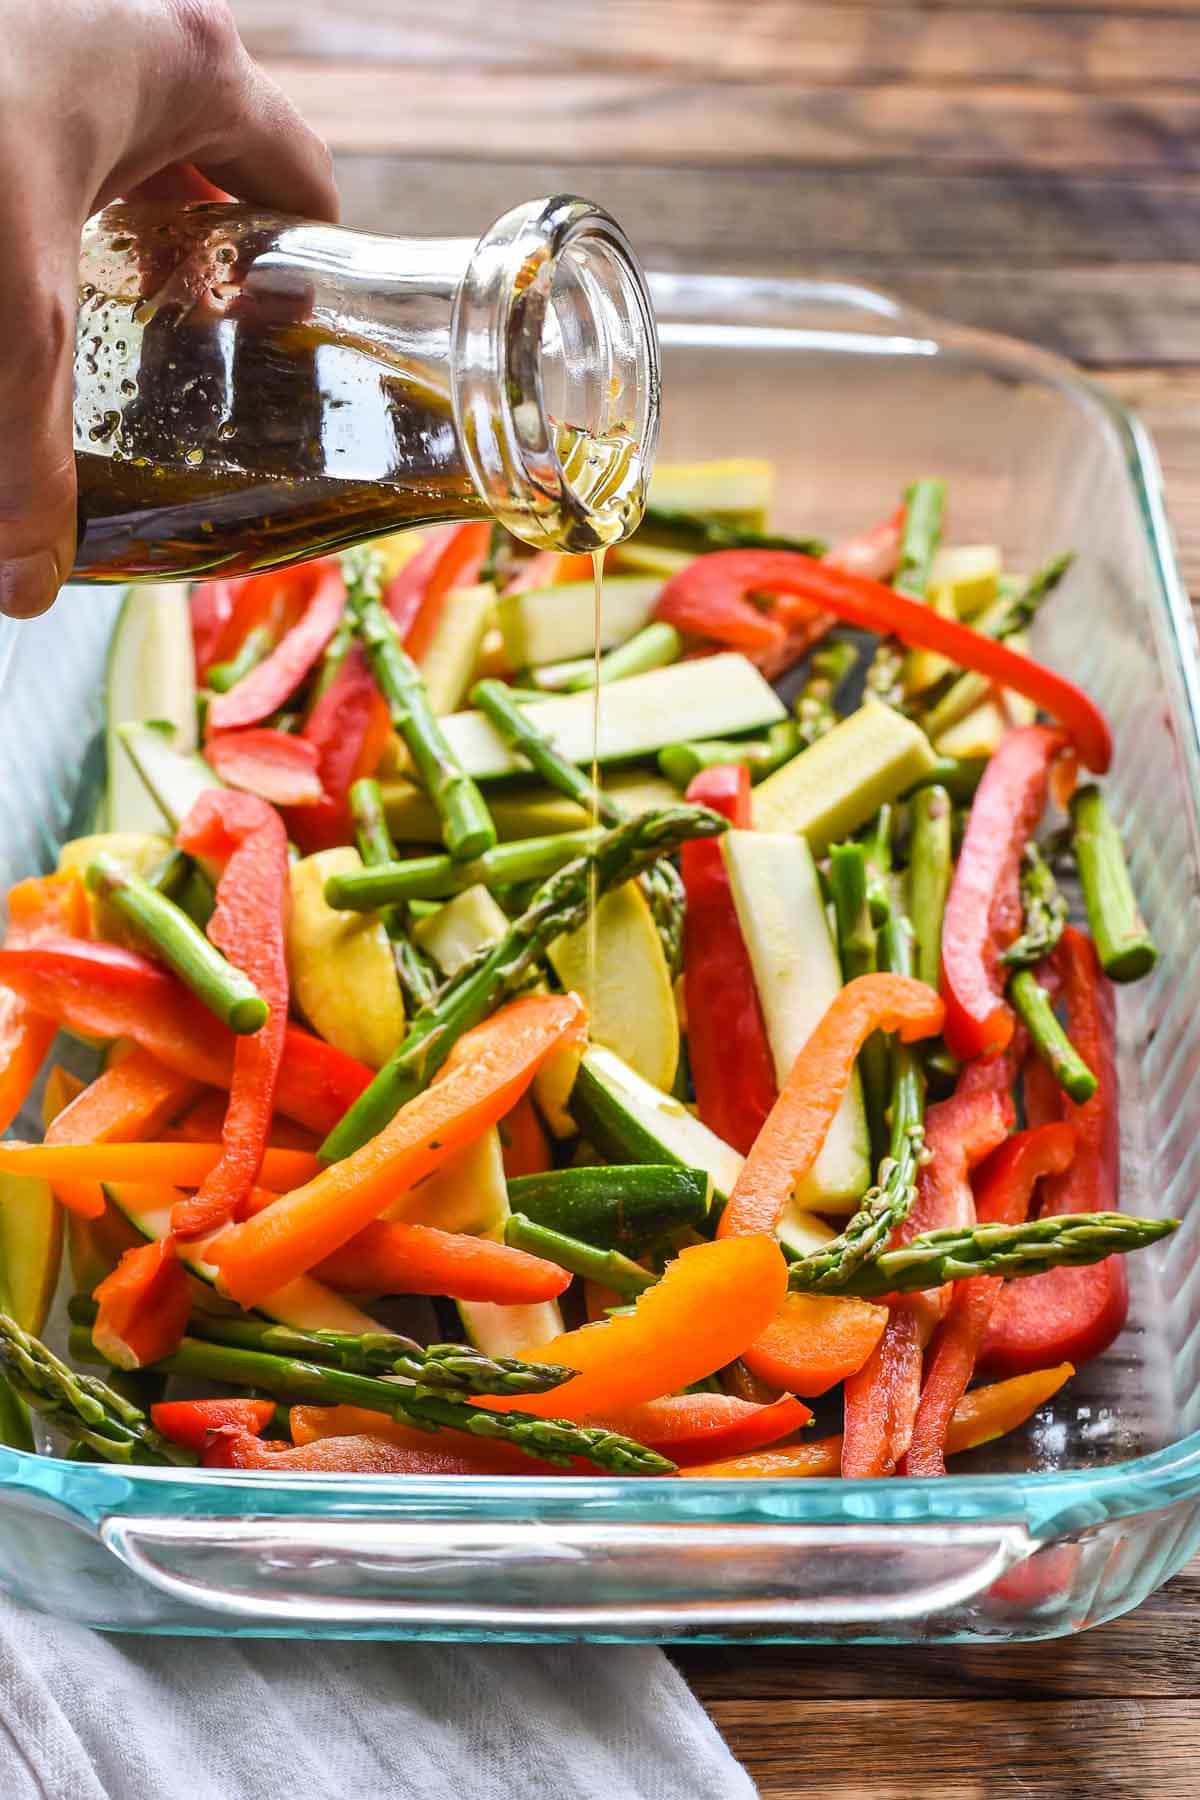 Balsamic Grilled Vegetables are the perfect easy side dish for grilling season. Loaded with bell peppers, zucchini, asparagus, and onions these flavorful veggies are sure to be a hit!